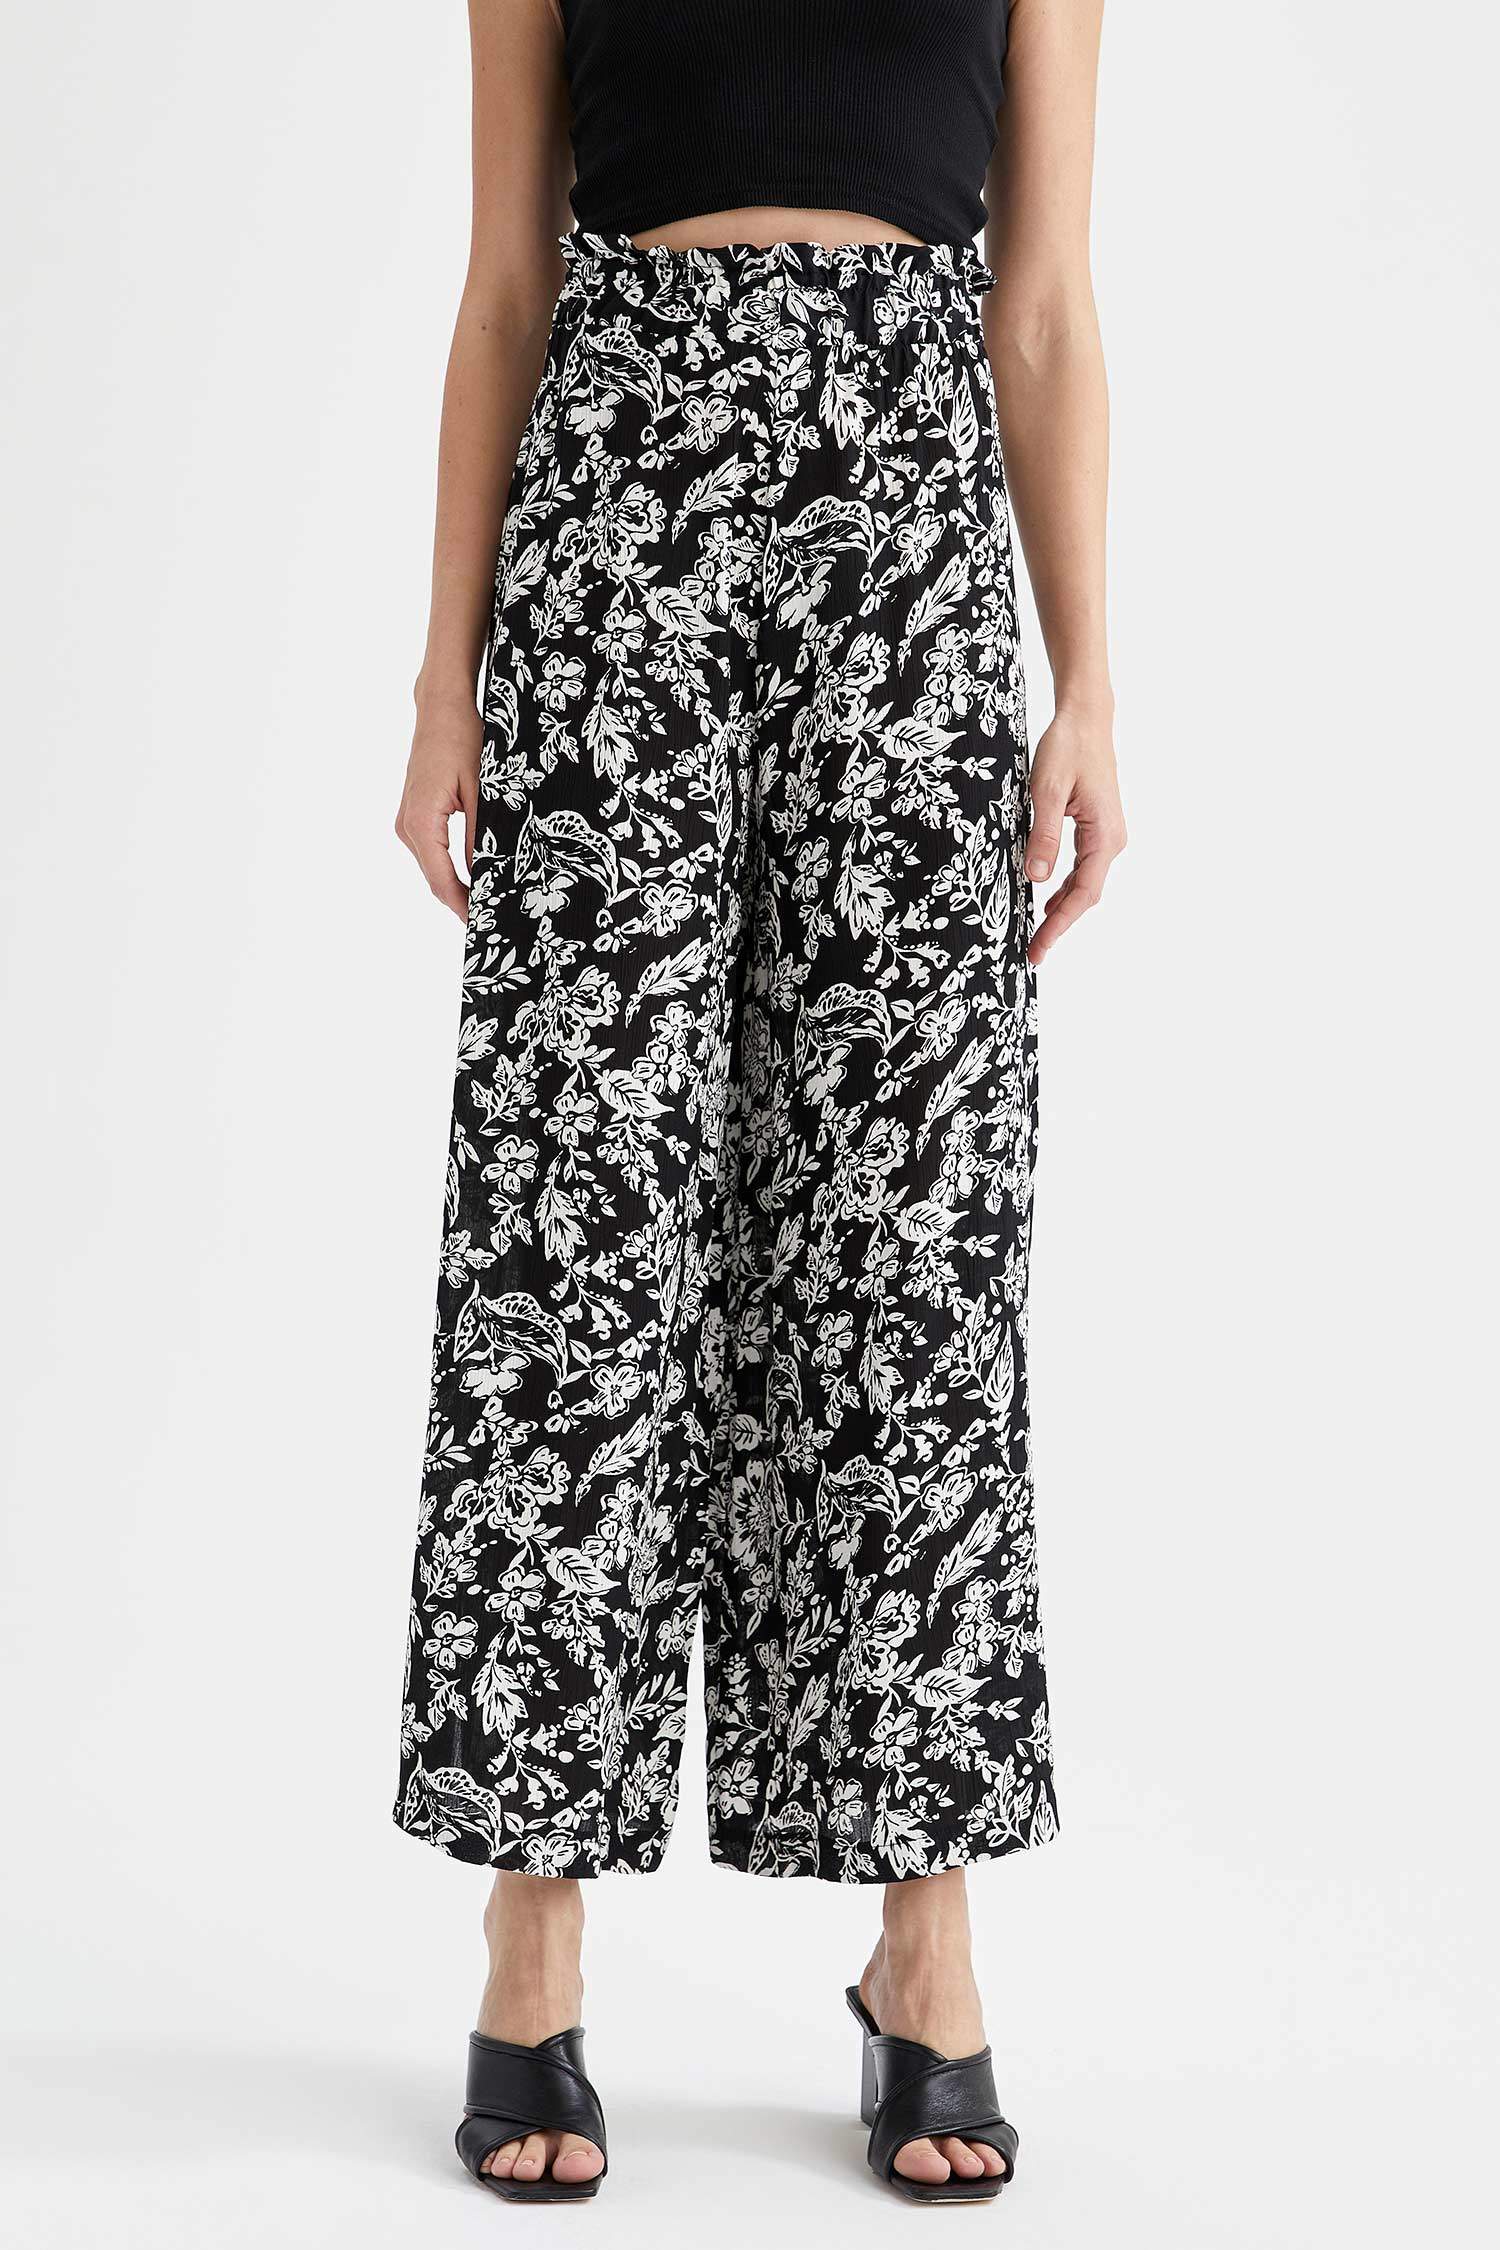 Black WOMAN Patterned High Waisted Palazzo Trousers 2045448 | DeFacto